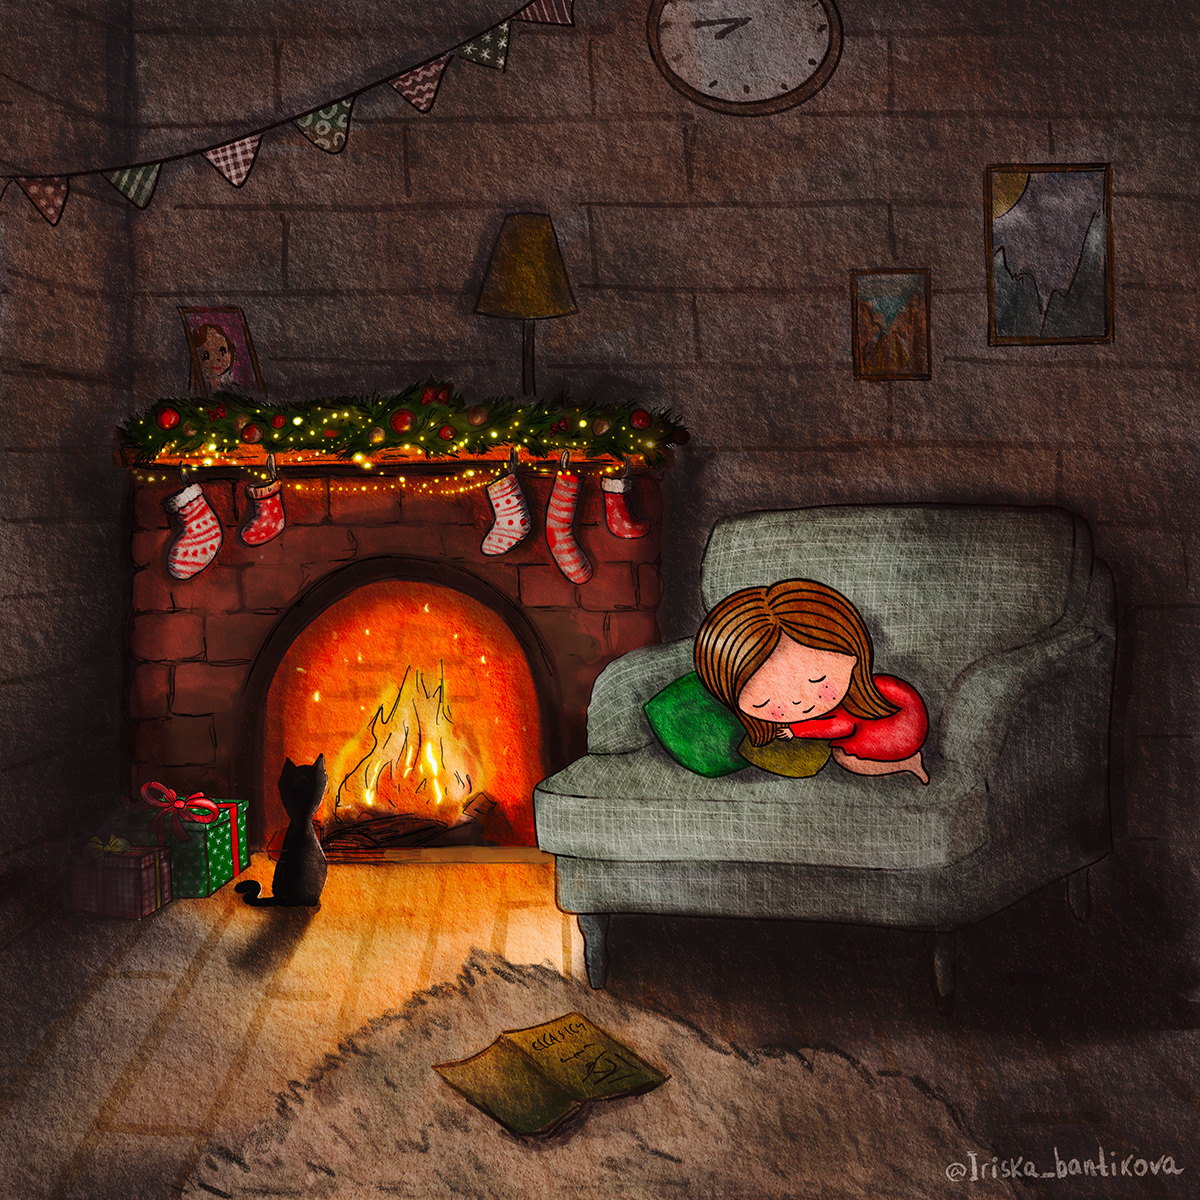 Cozy illustration with cute girl sleeping next to fireplace